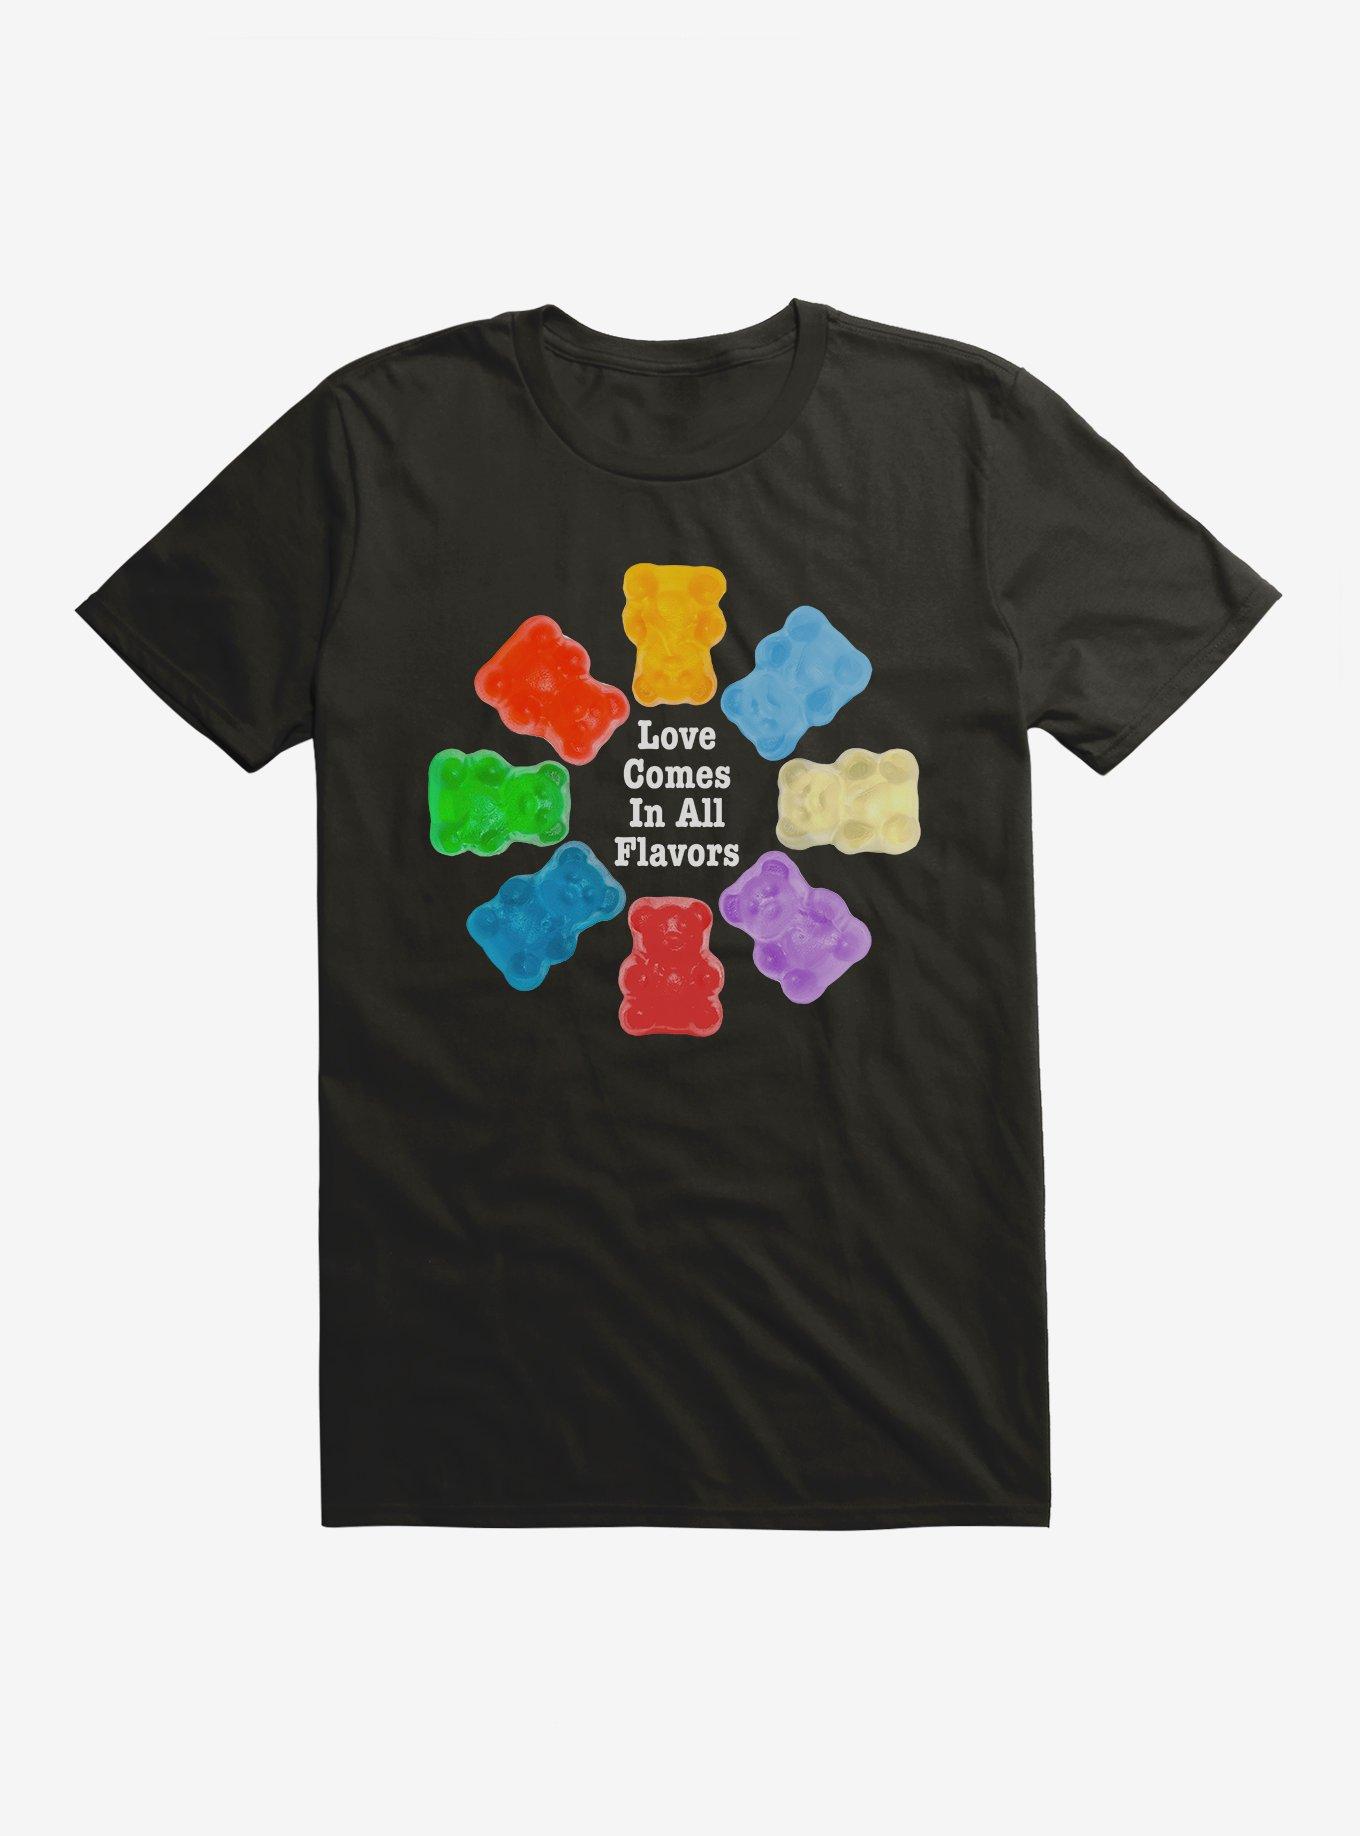 Hot Topic Bear Candy Love Comes In All Flavors T-Shirt, BLACK, hi-res